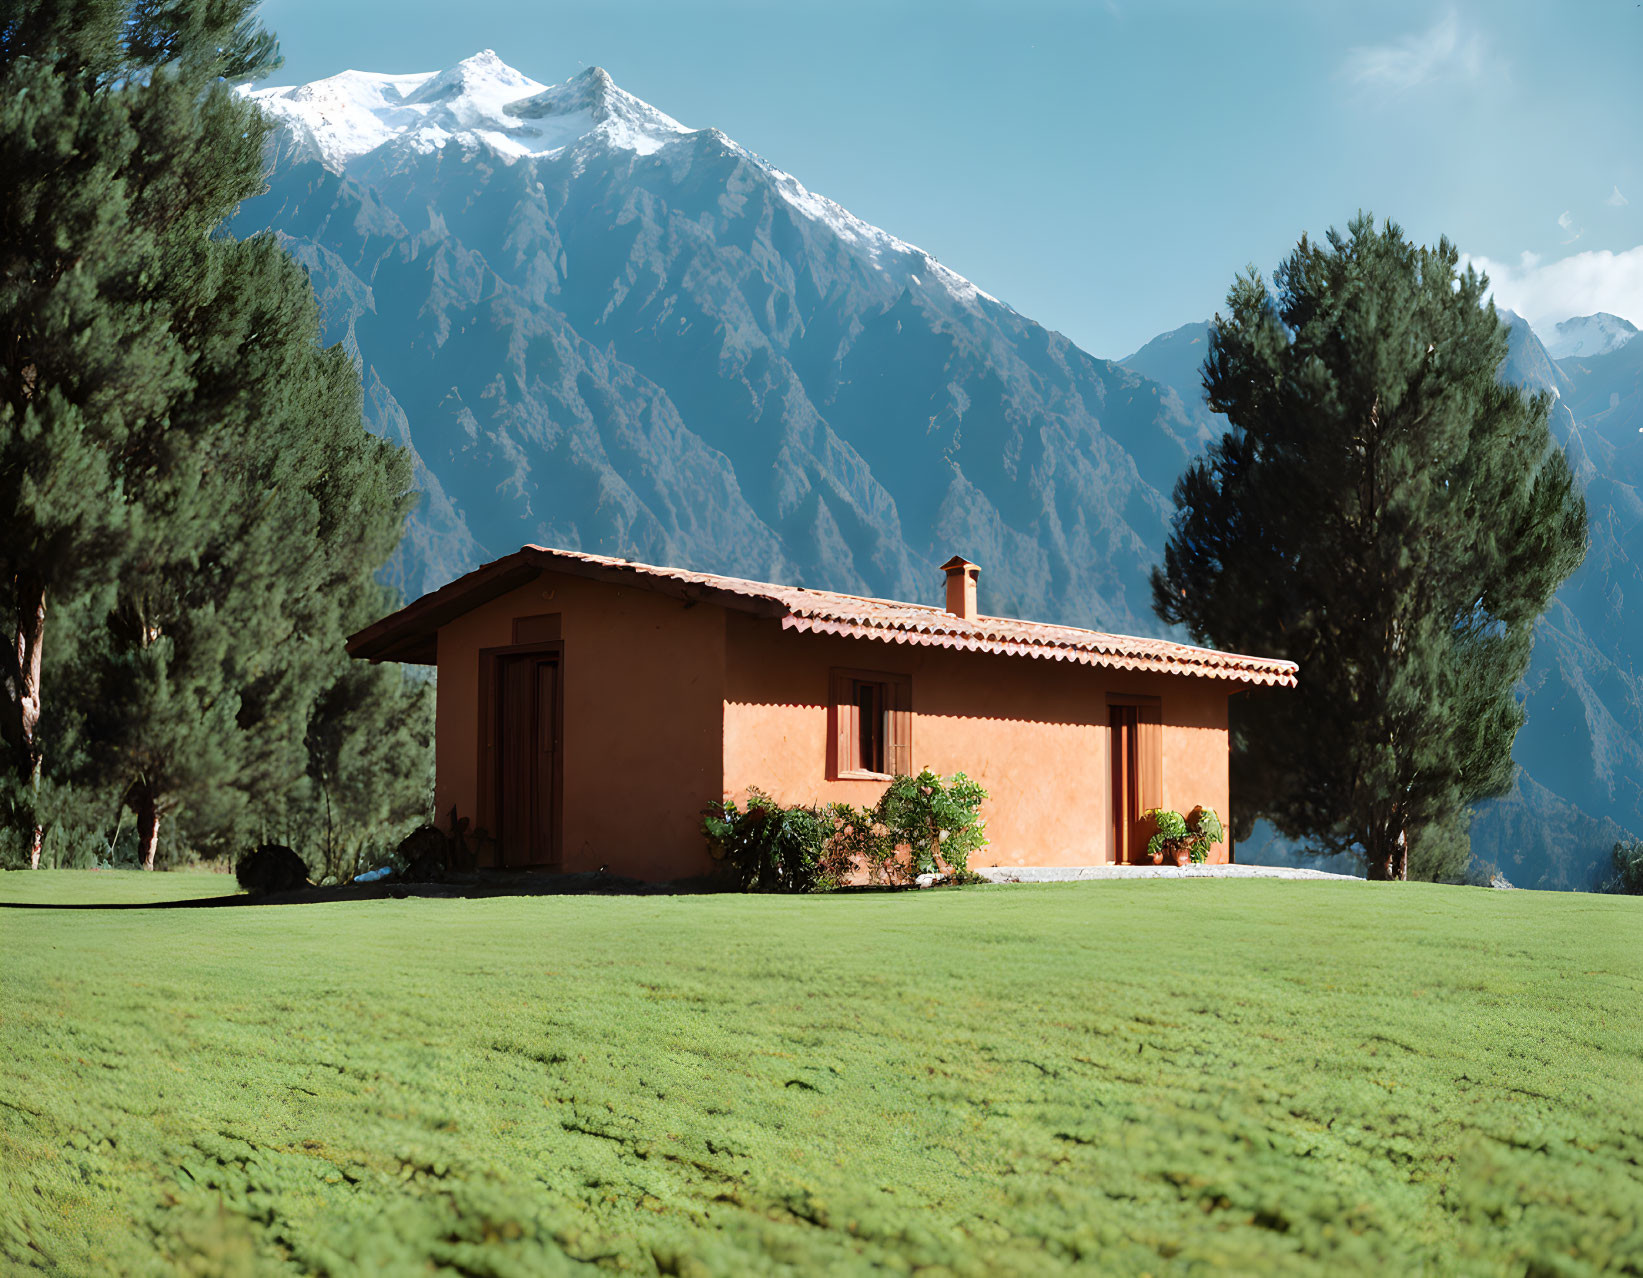 Tranquil landscape with brown house, green lawn, mountains, blue sky